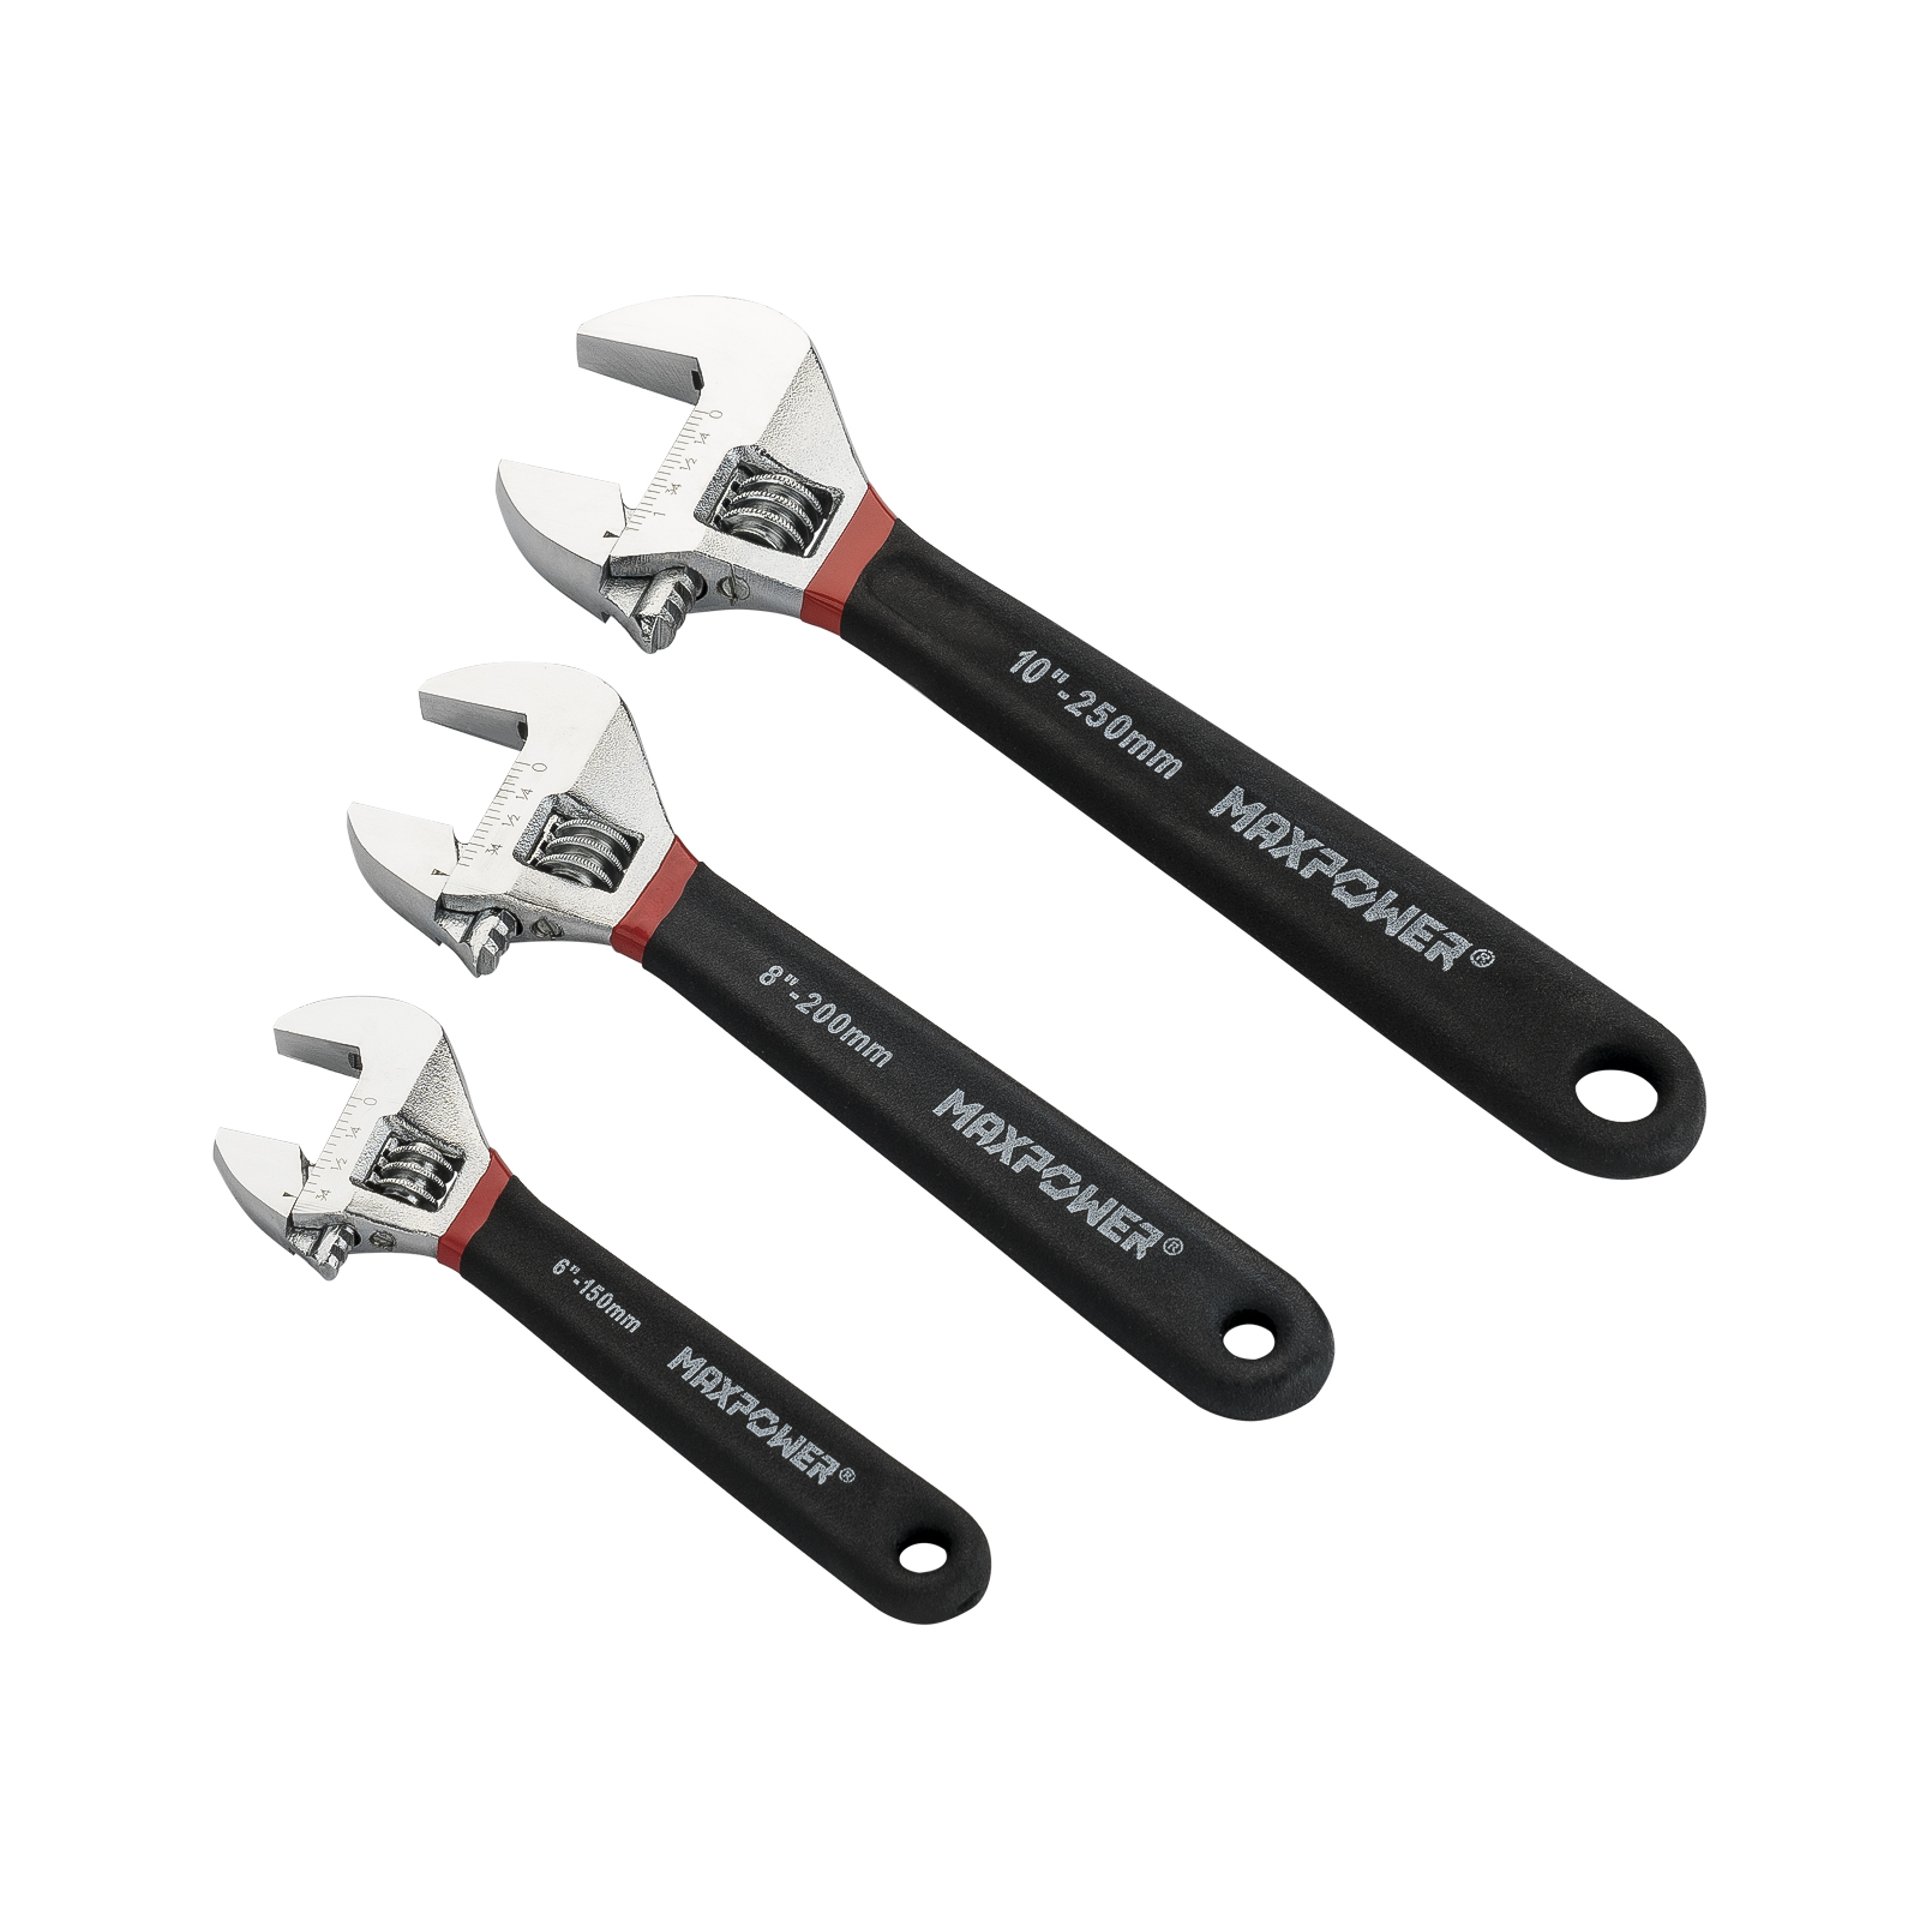 Adjustable Wrench Set (6in, 8in, 10in), Double Dipped, 3PCS